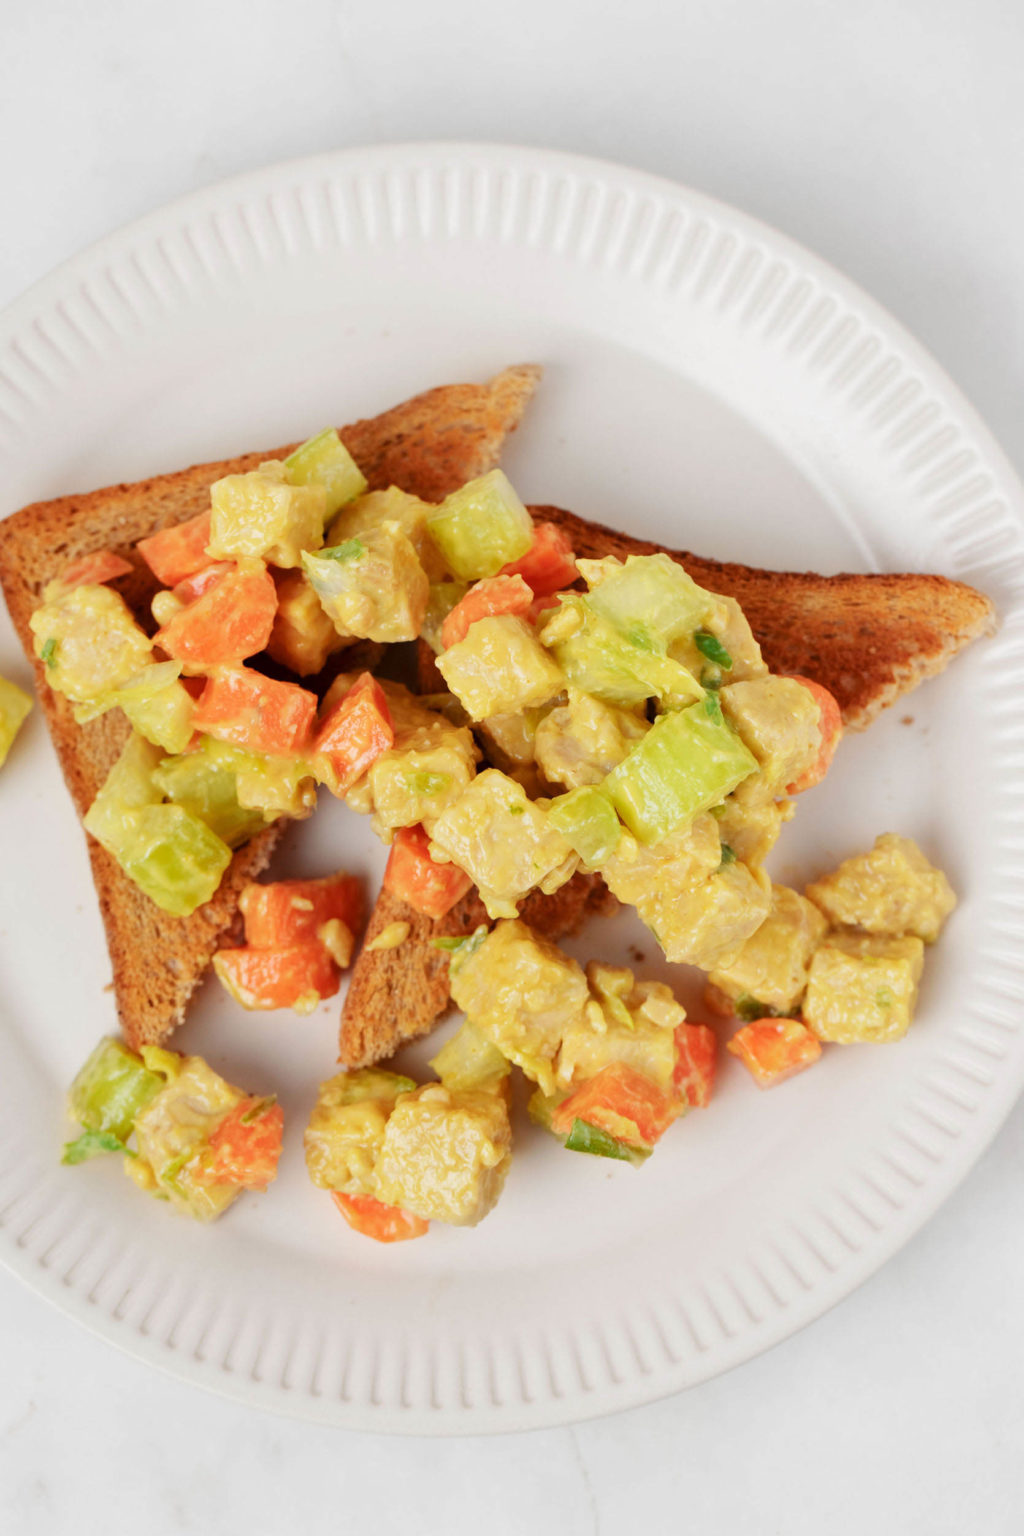 Two triangular slices of toast are topped with an easy tempeh lunch salad. 